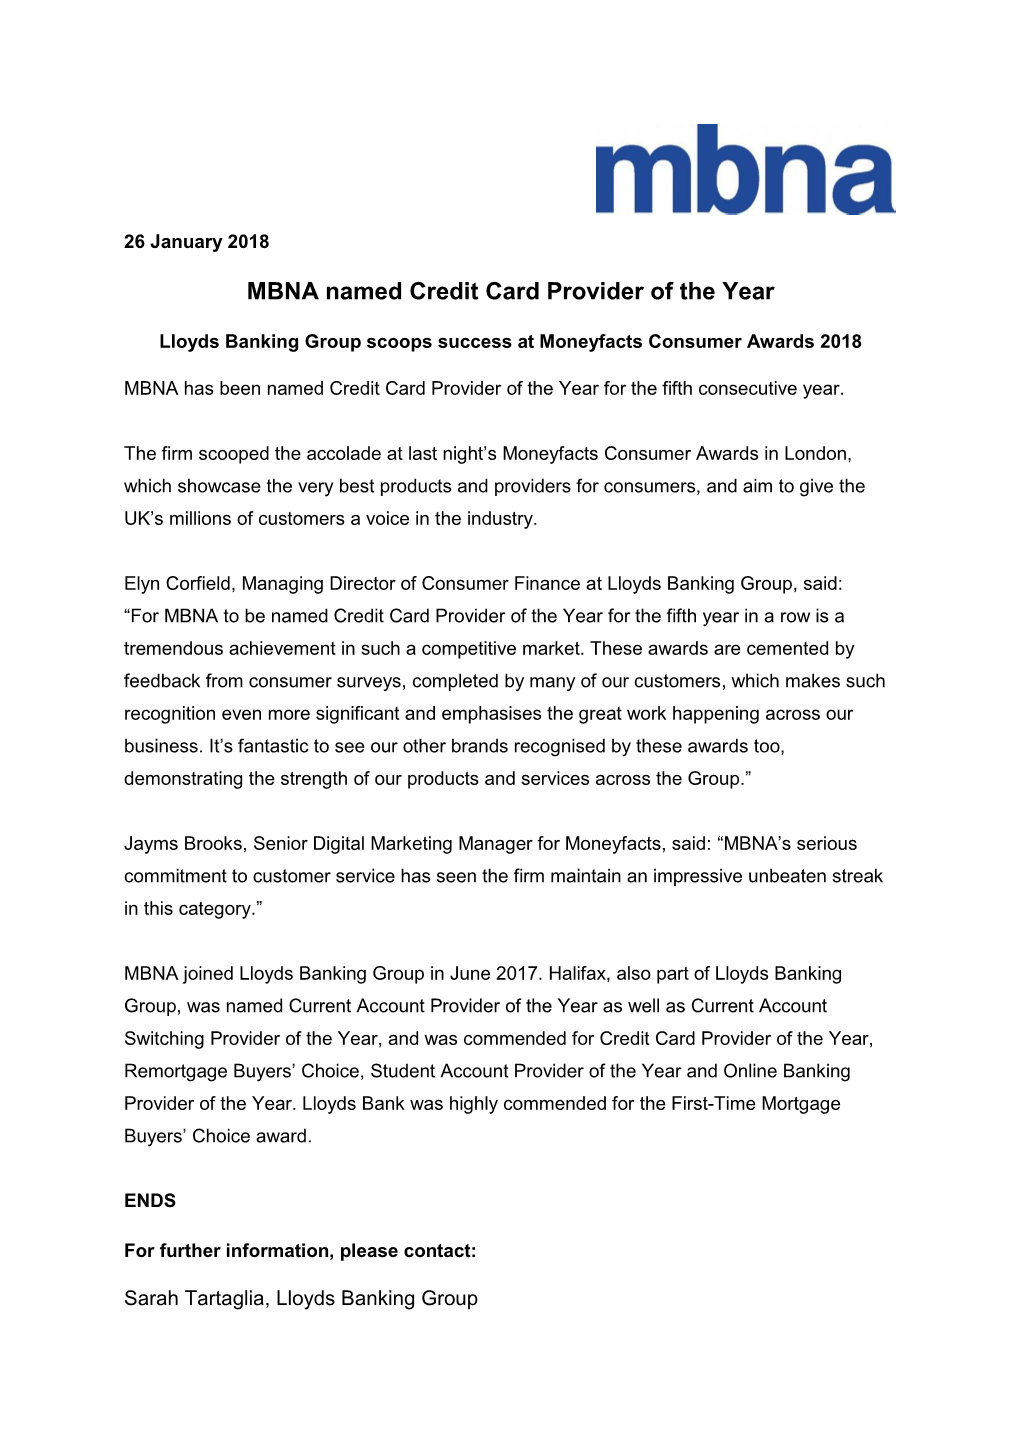 MBNA Named Credit Card Provider of the Year